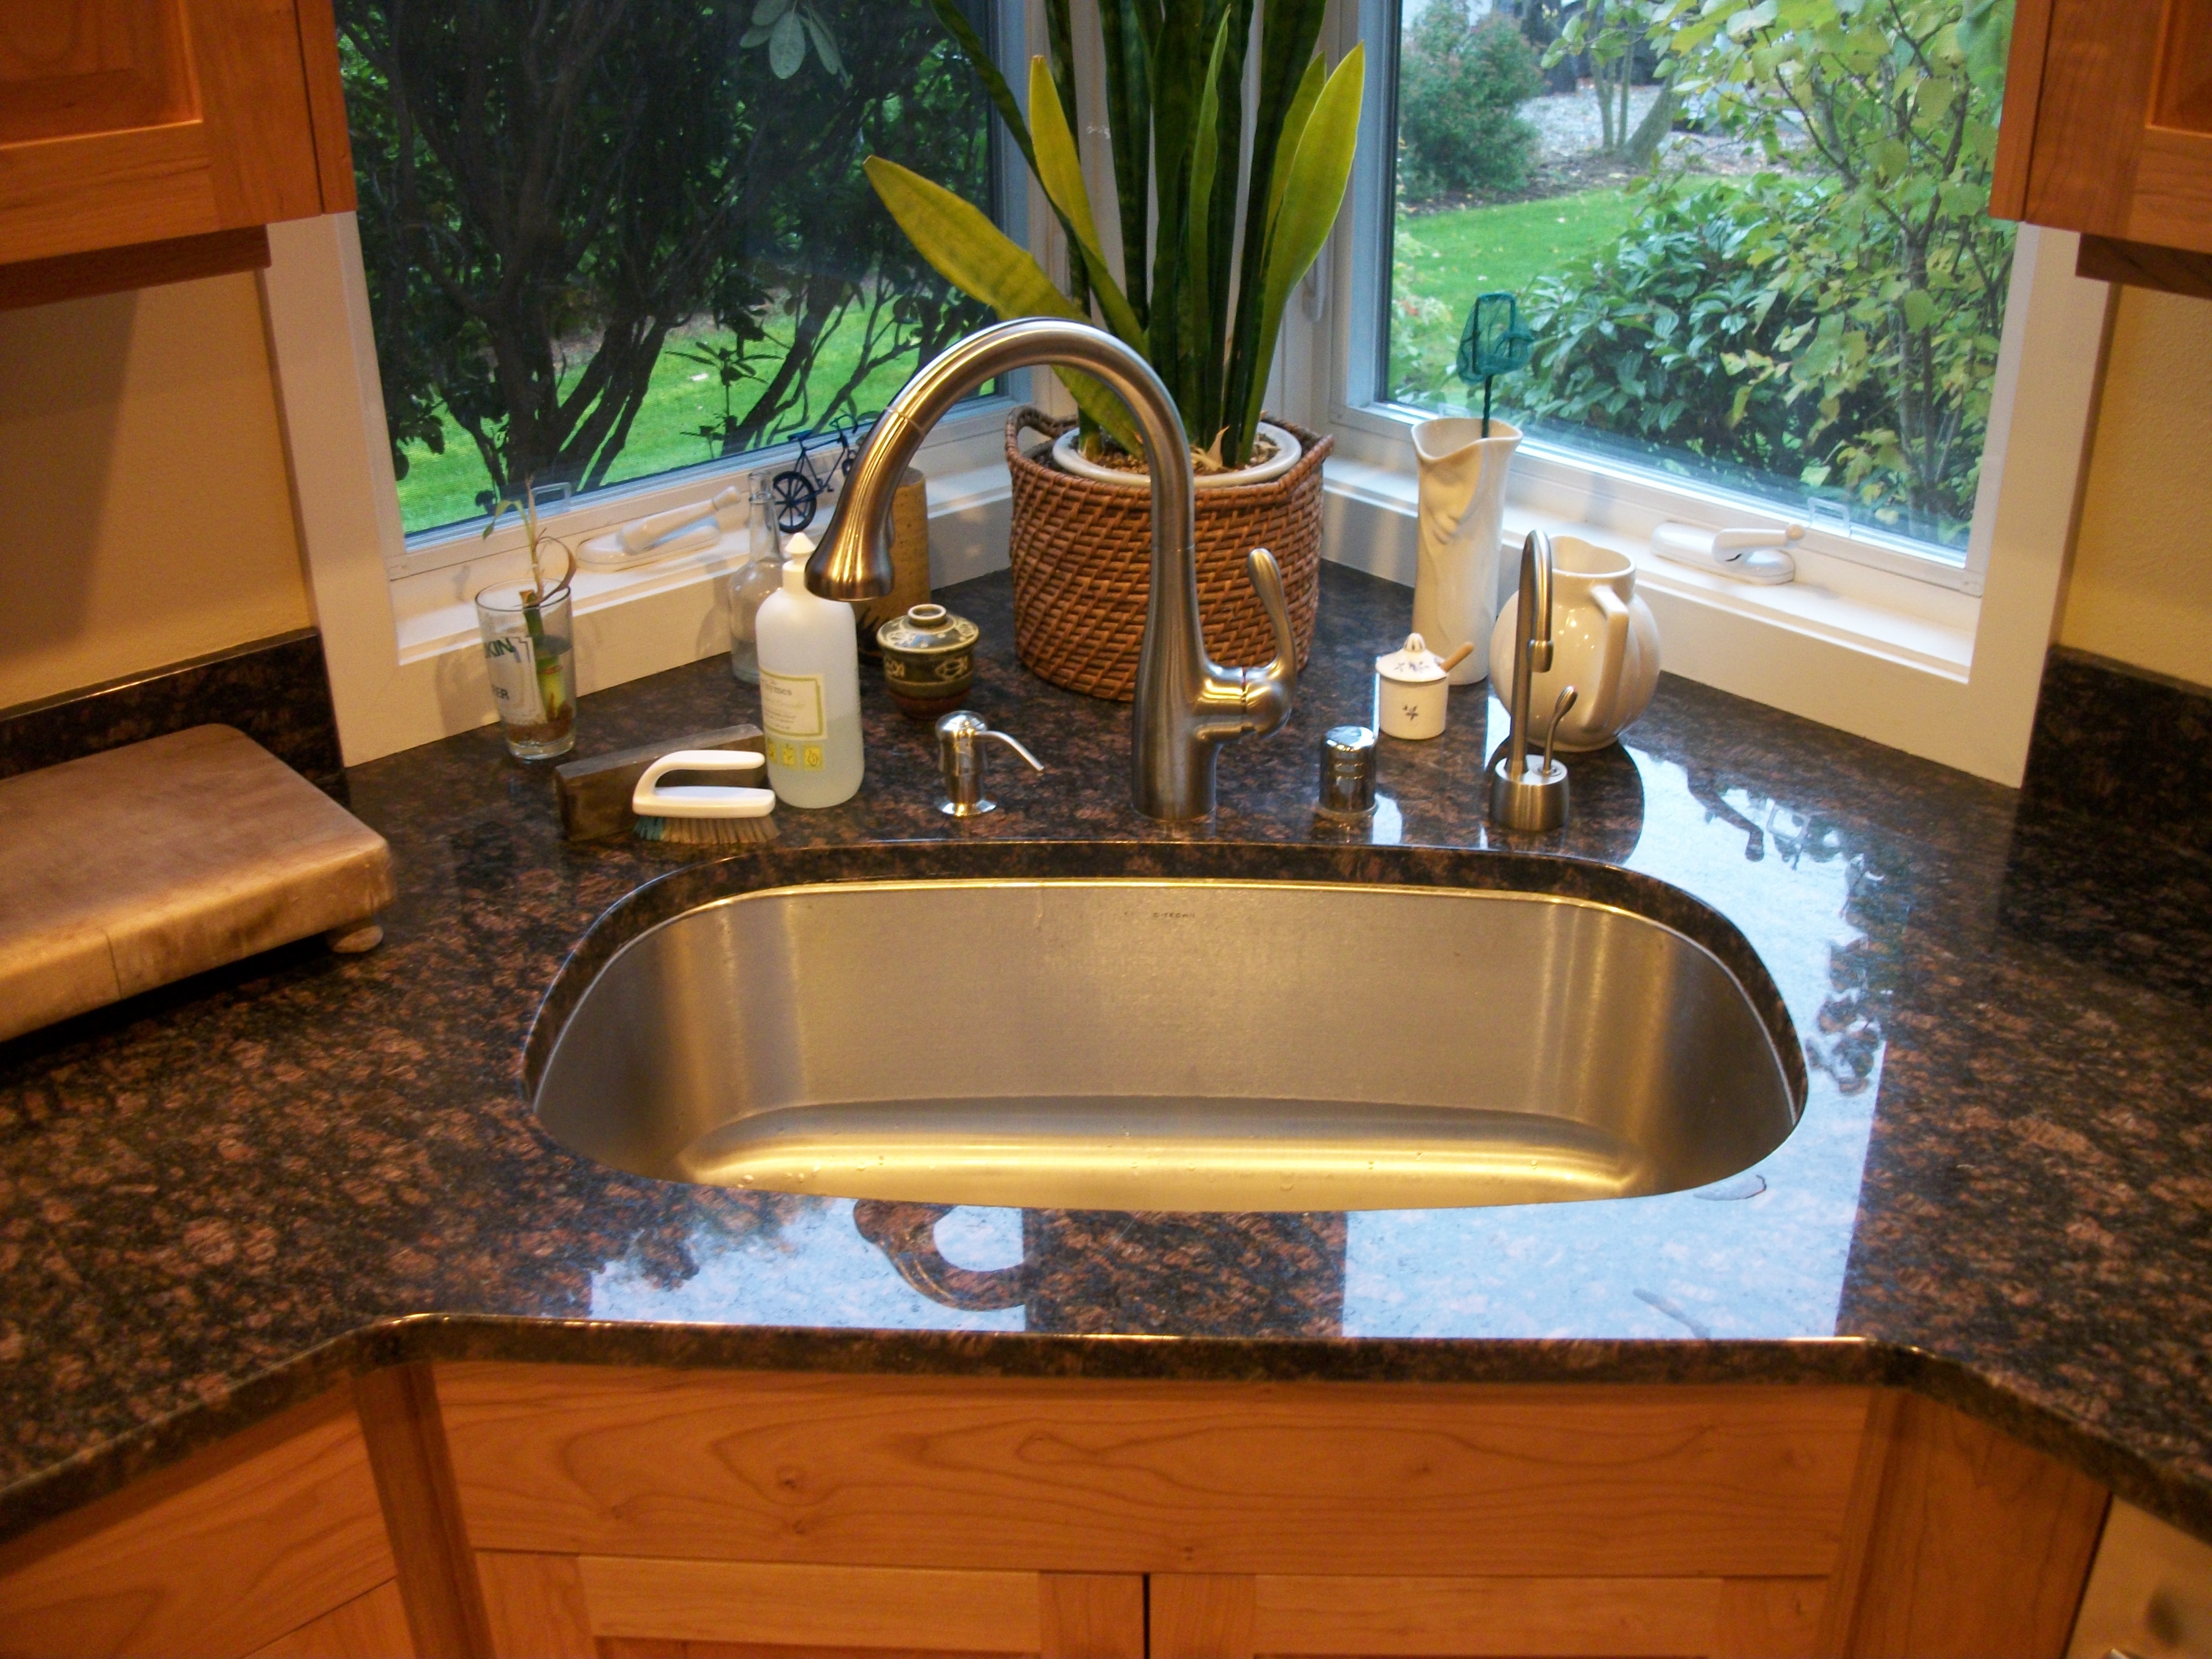 Popular kitchen sink styles in 2012 | Rose Construction Inc